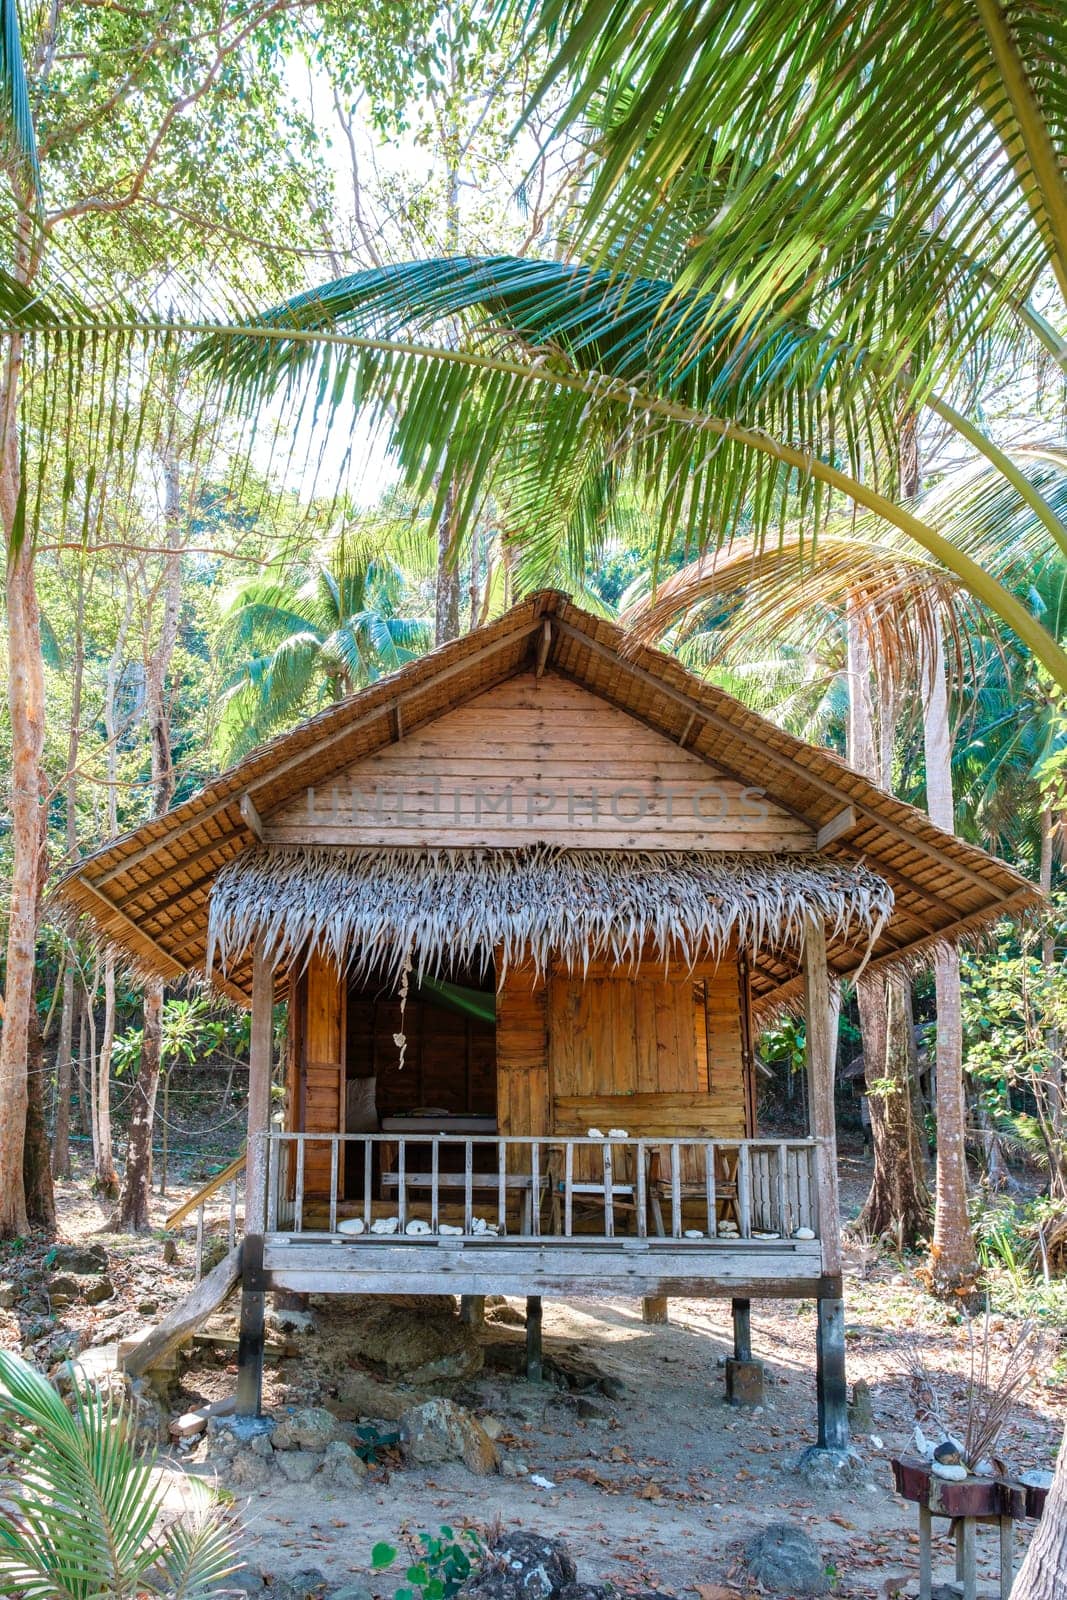 Wooden bungalow on the beach of Koh Wai Island Trat Thailand is a tinny tropical Island near Koh Chang. wooden bamboo hut bungalow on the beach